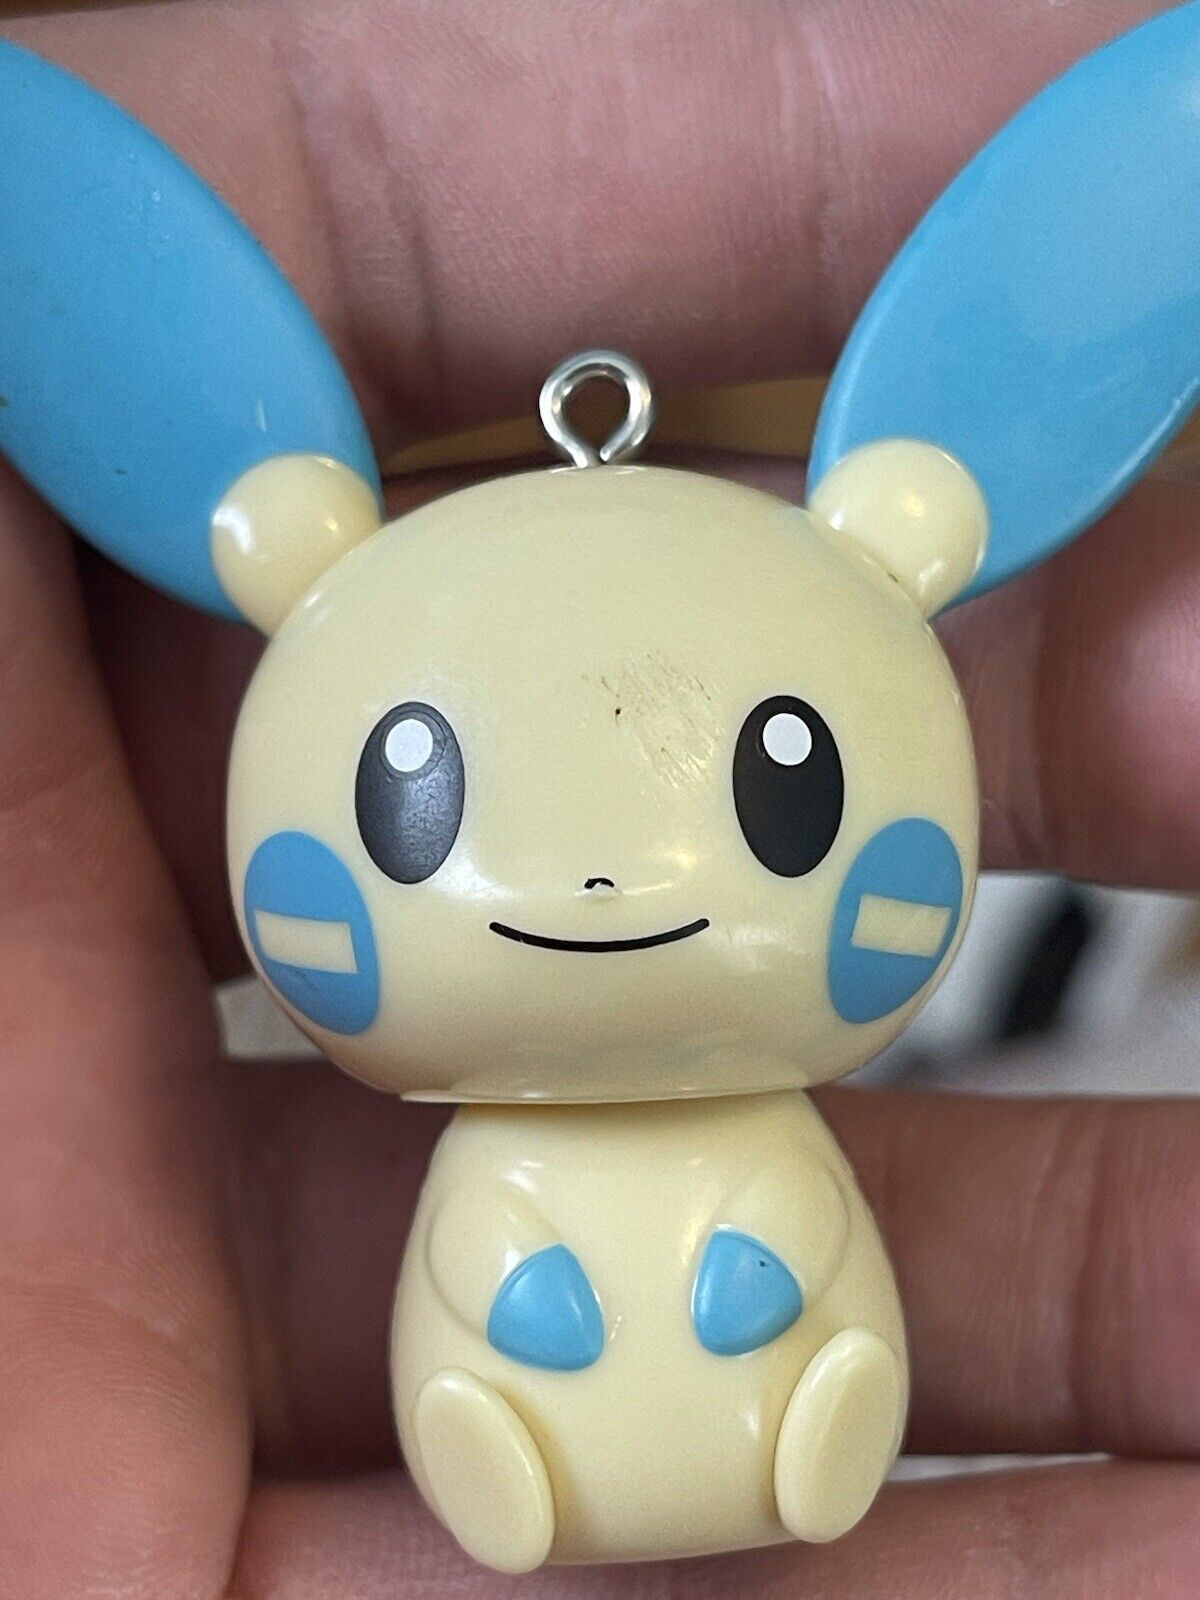 Plusle Minun Pokemon Figure Tomy 2004 Monster Collection Toy Japan